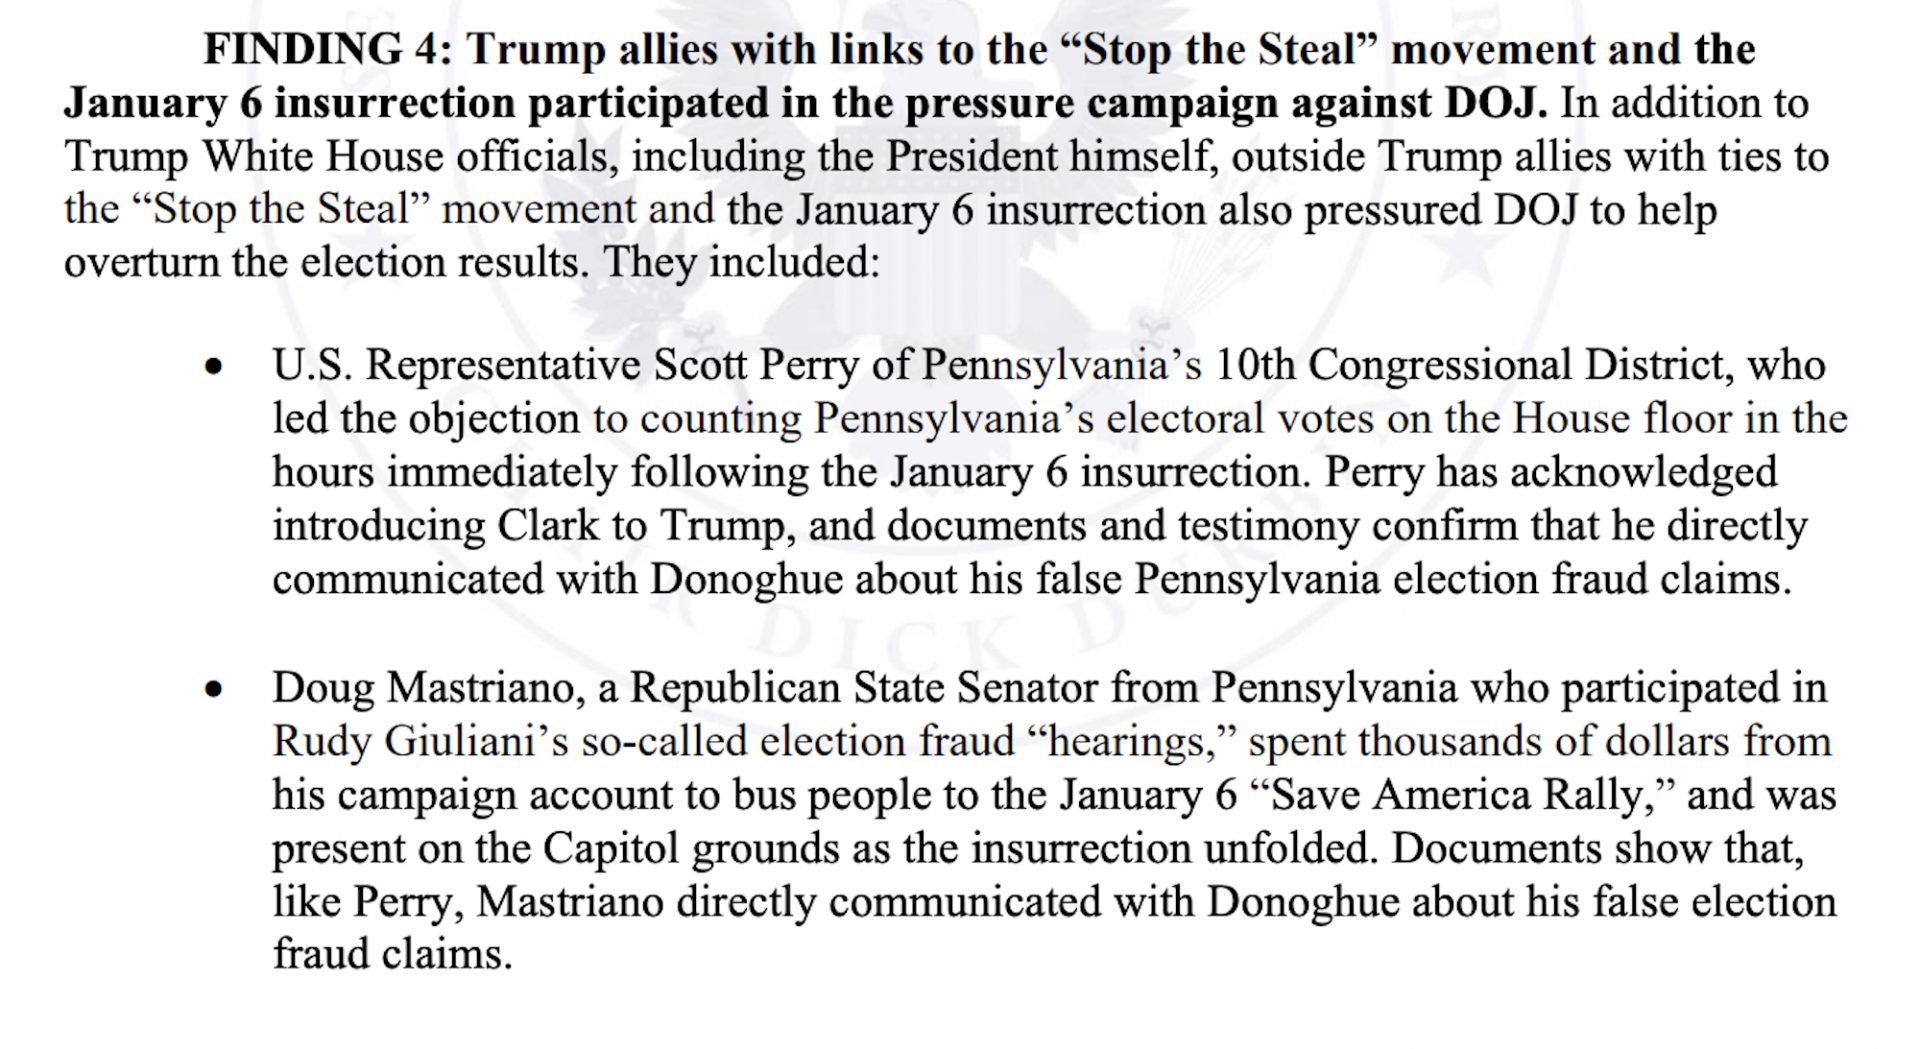 Screen capture of report says: "Finding 4: Trump allies with links to 'Stop the Steal' movement and the January 6 insurrection participated in the pressure campaign against DOJ." Report goes on to list U.S. Representative Scott Perry and Pennsylvania State Senator Doug Mastriano.